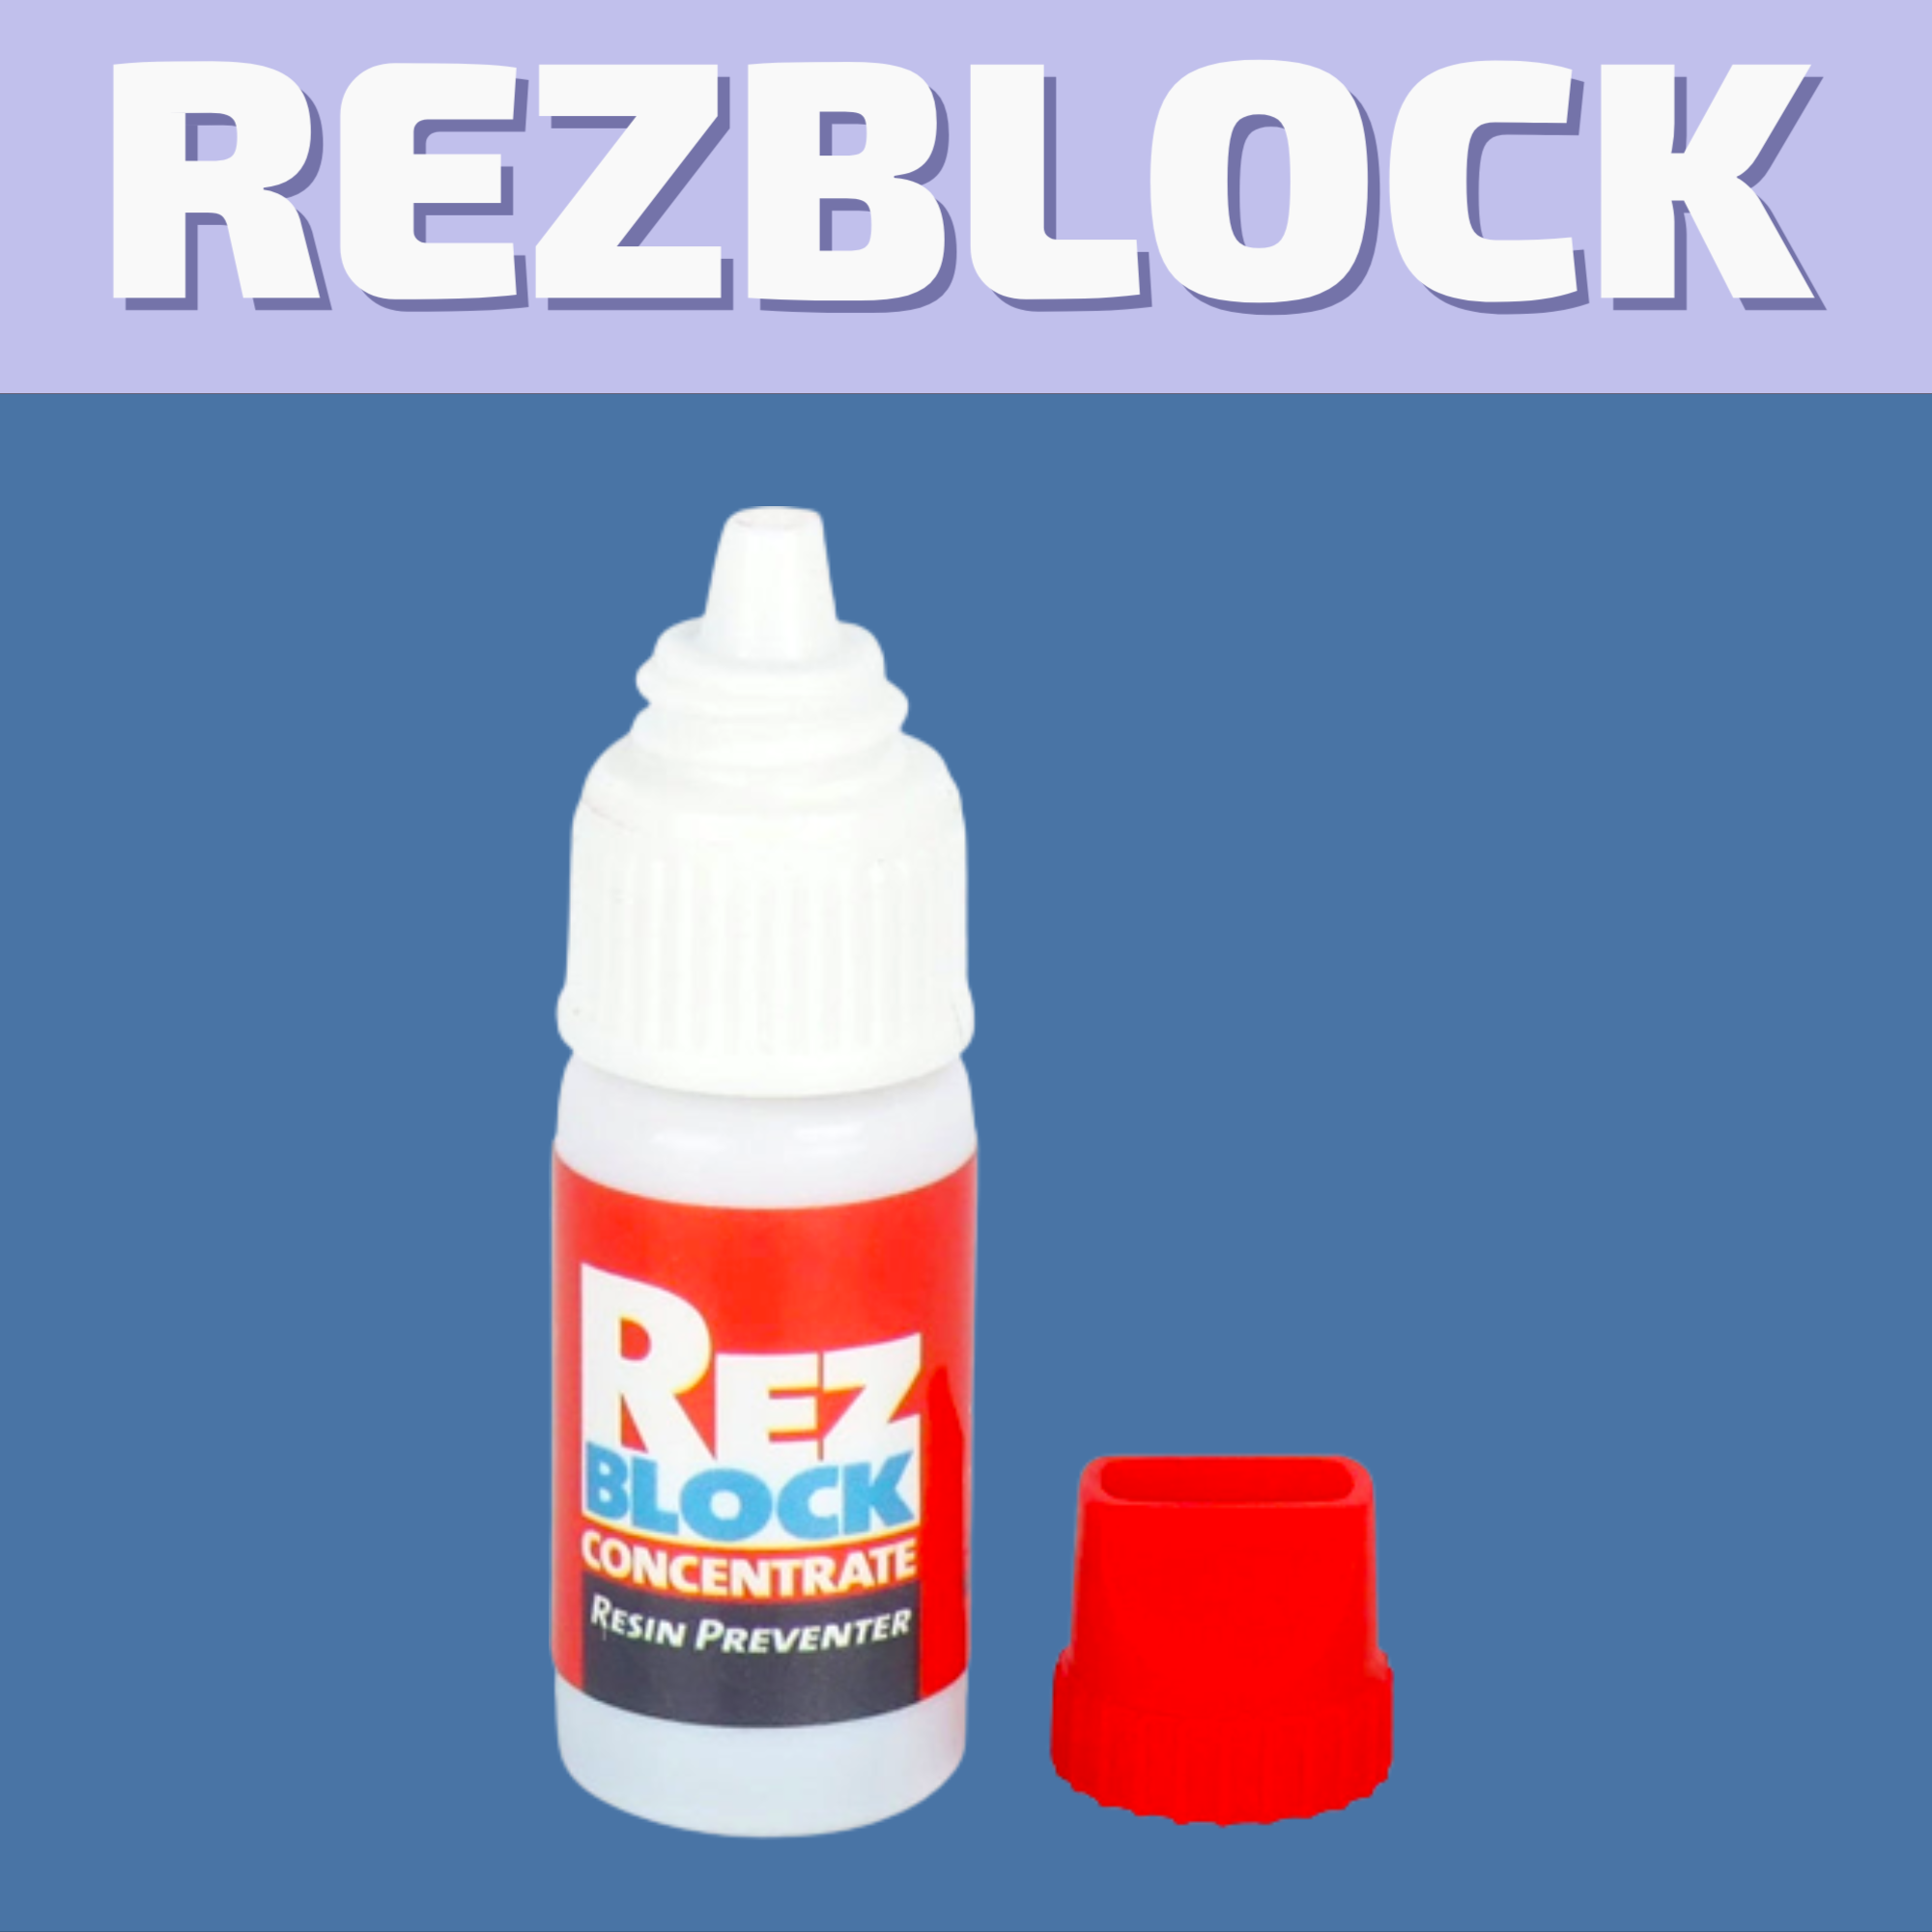 Buy Rez Block and other bong cleaners for same day delivery or visit the best cannabis store on 580 Academy Road.   